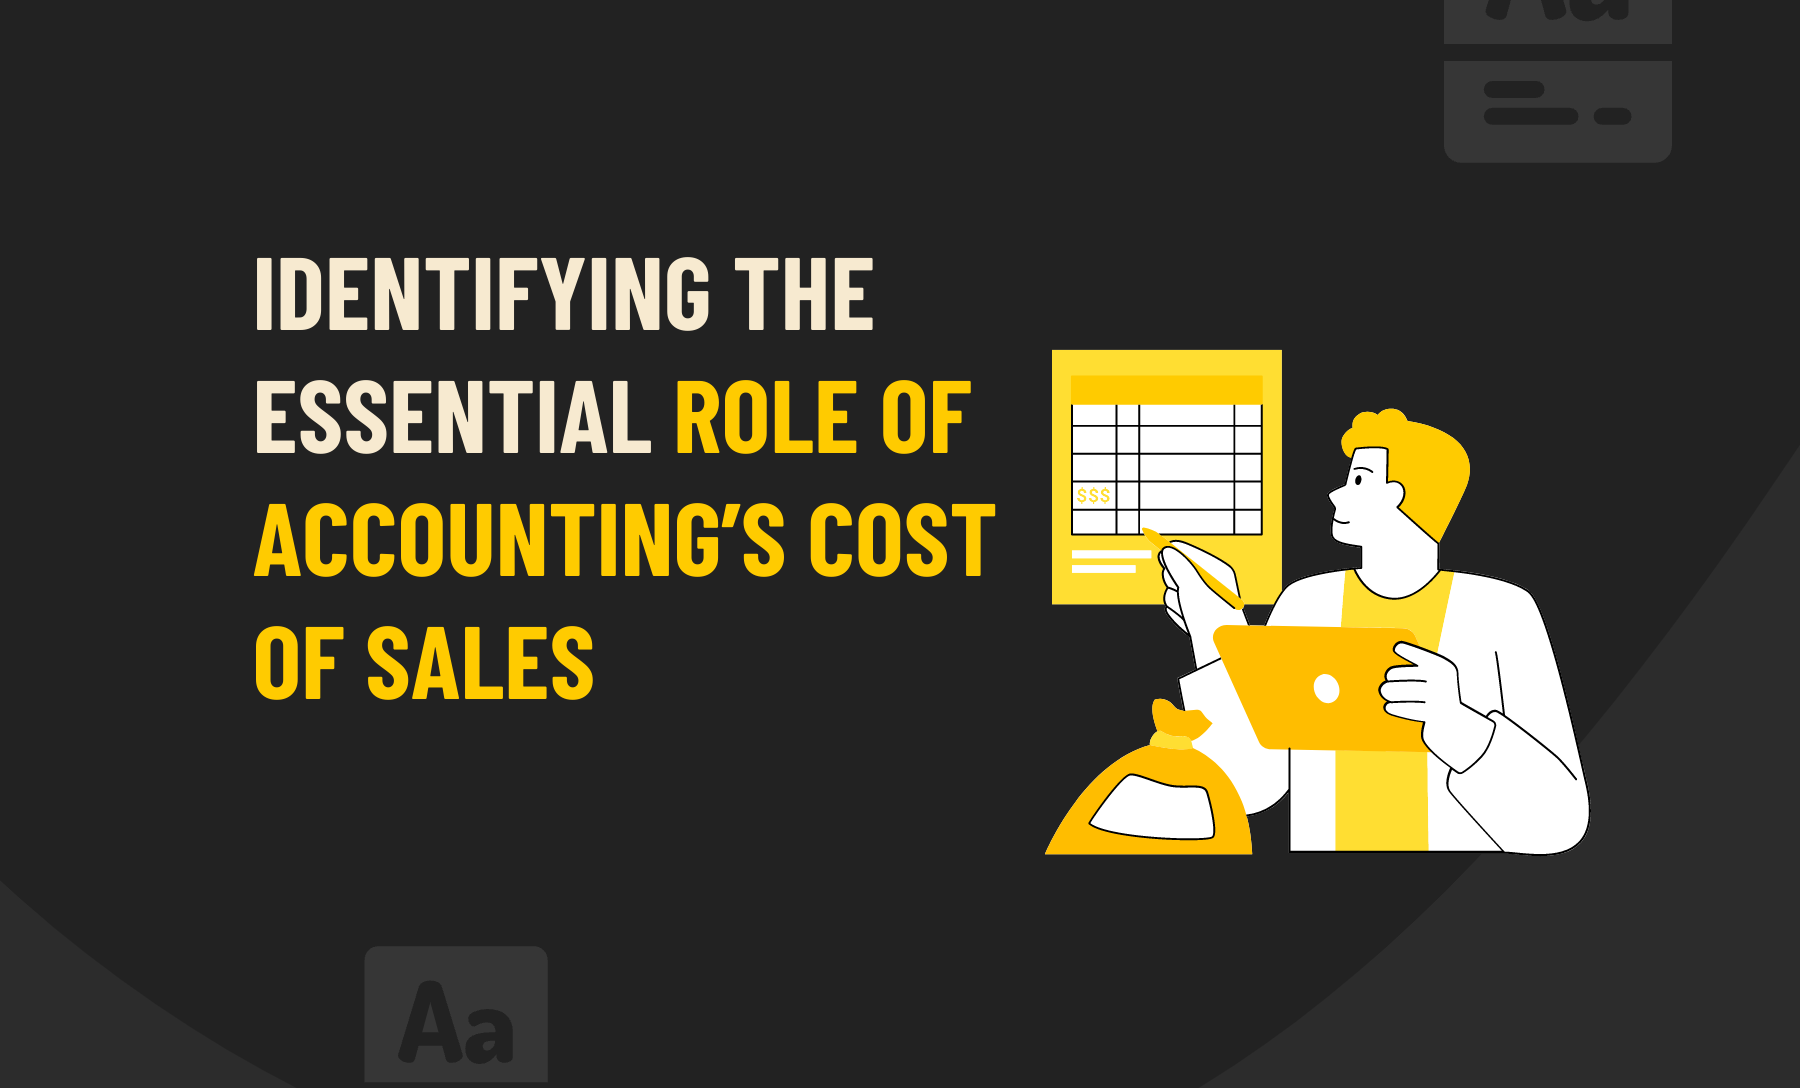 Accounting's Cost Of Sales